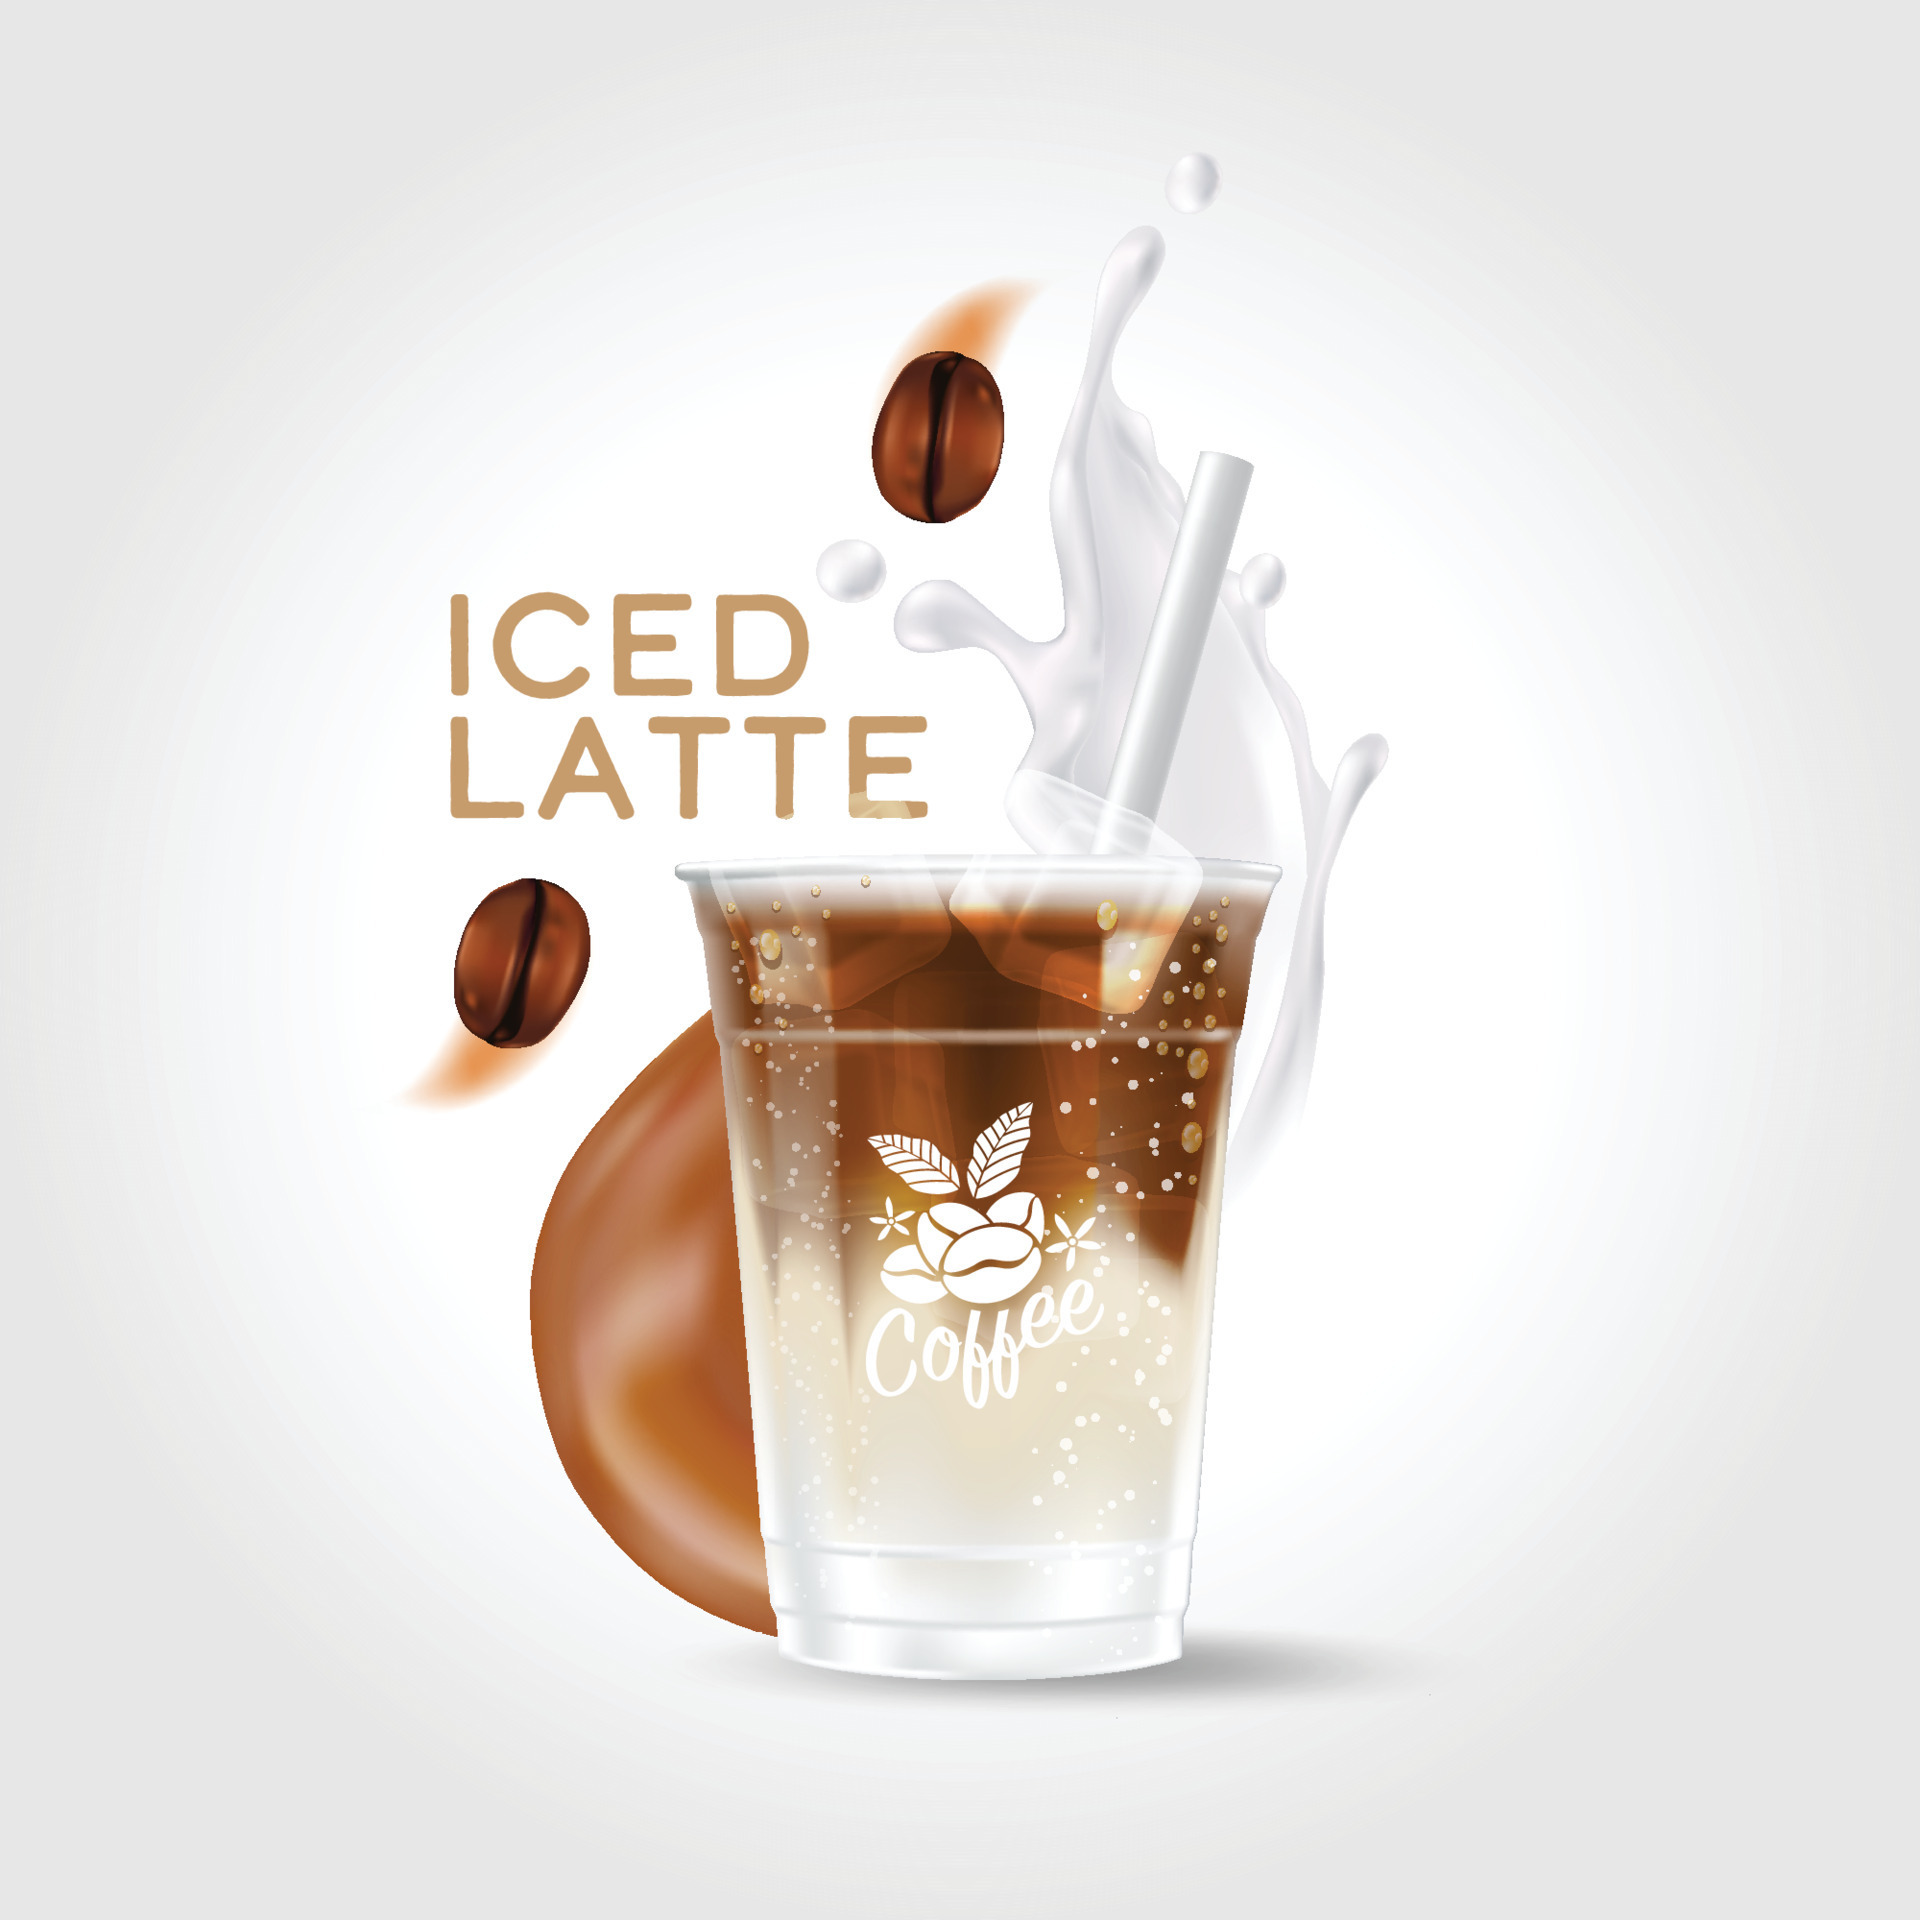 iced coffee takeaway cup vector illustration, Iced latte 8924641